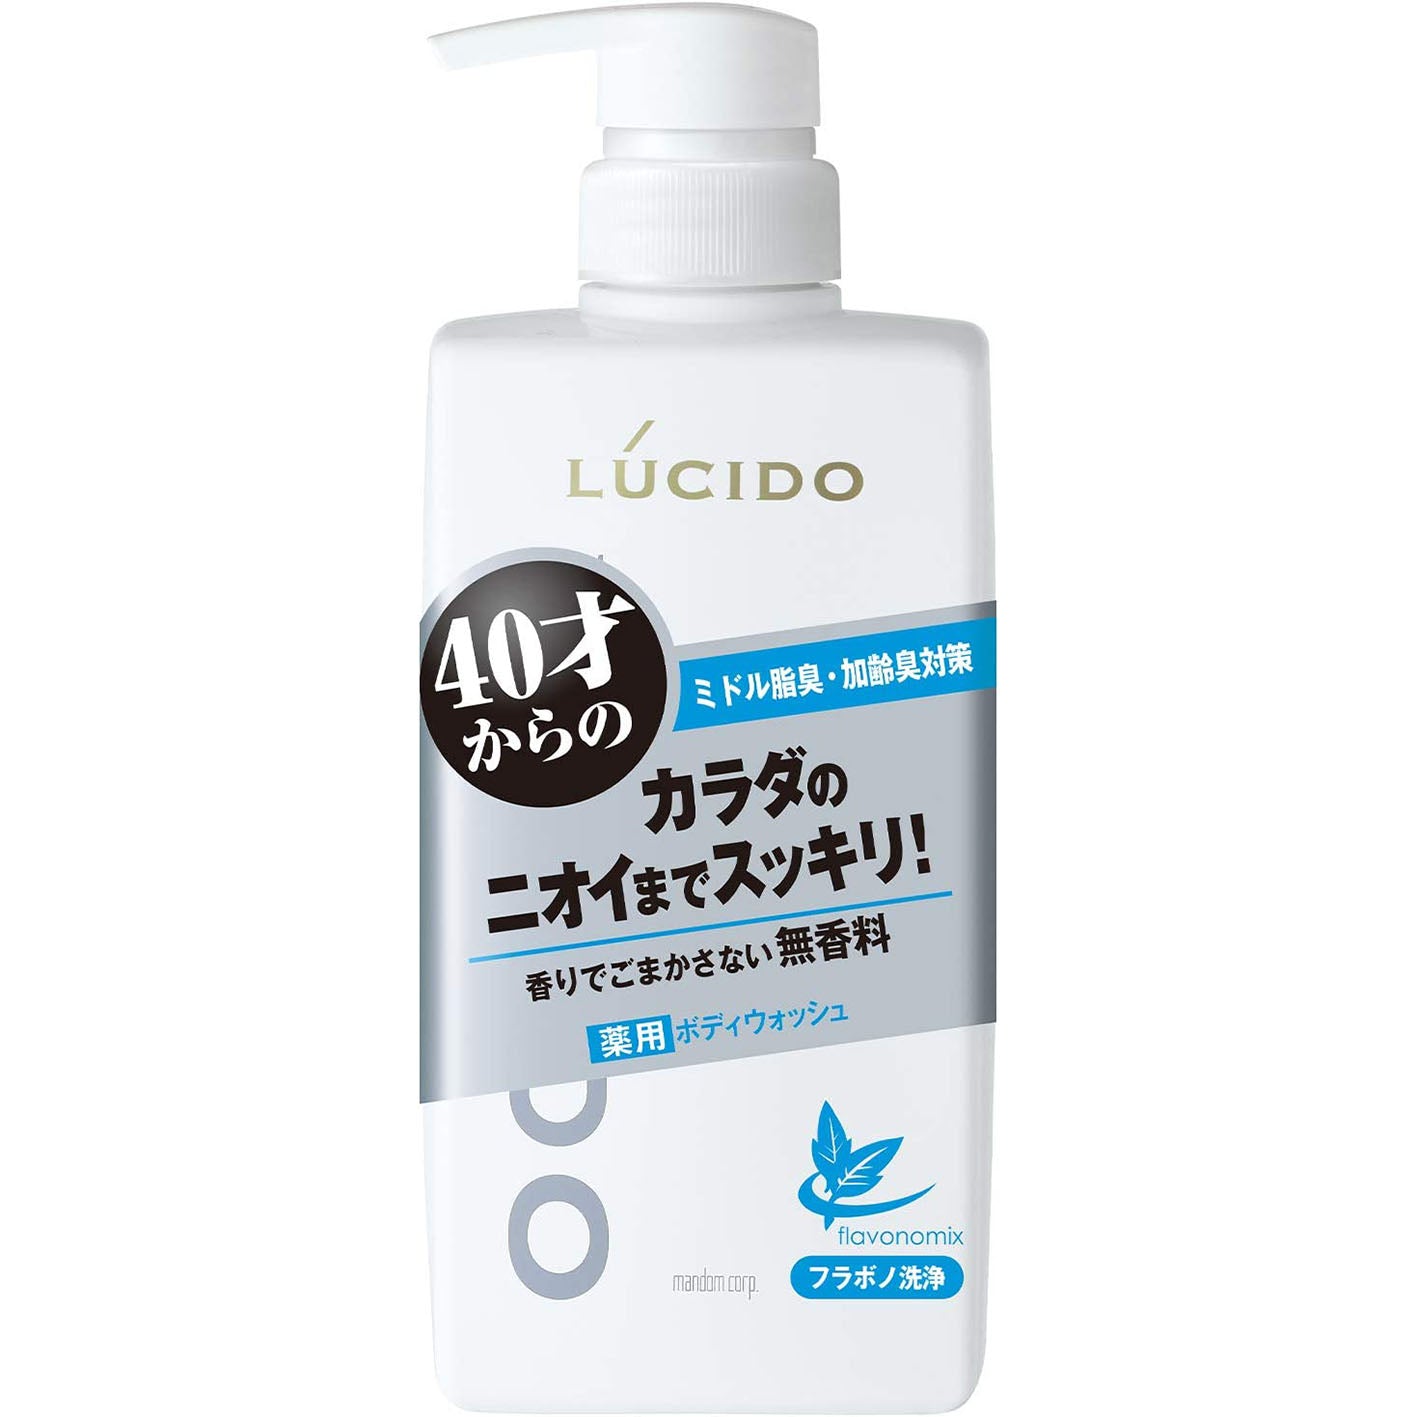 Lucido Medicated Deodorant Body Wash 450ml - Harajuku Culture Japan - Japanease Products Store Beauty and Stationery